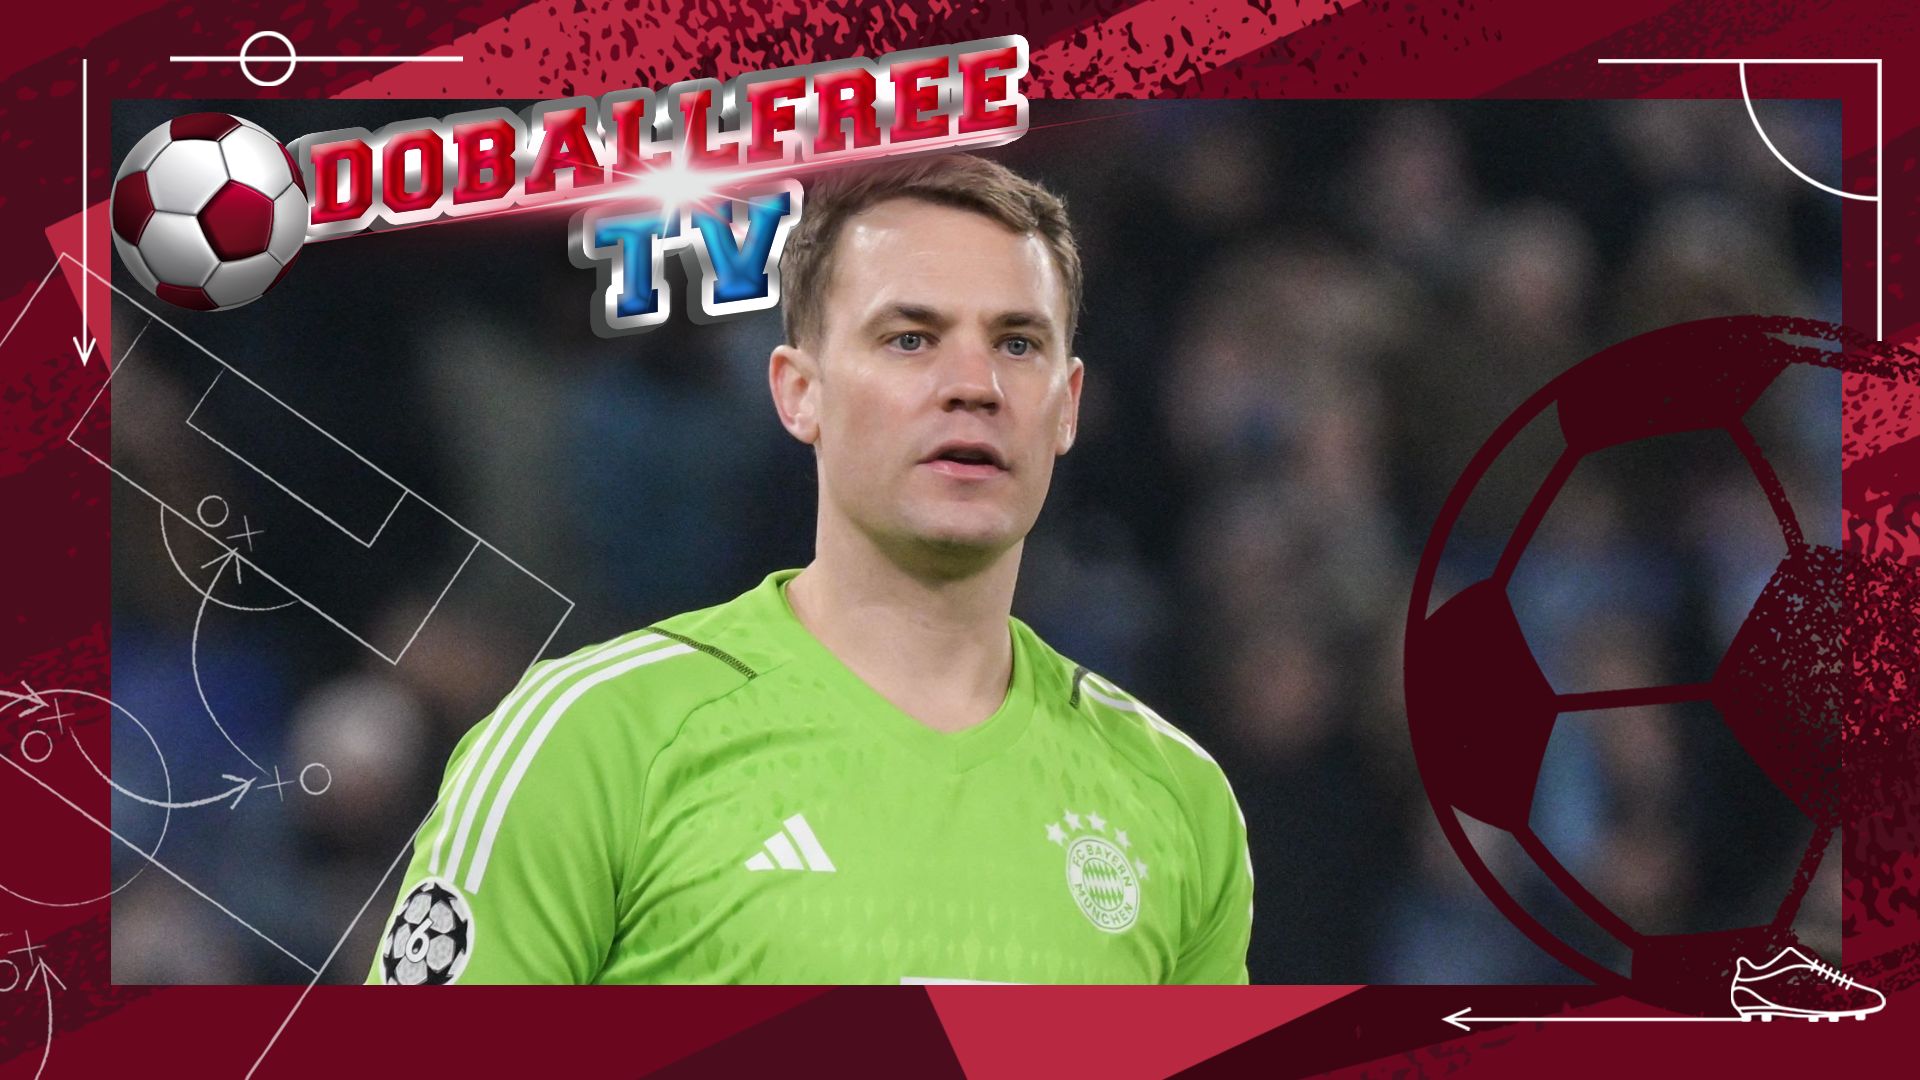 Manuel Neuer doesn't want to risk playing his next league game in hopes of being fully fit to face Arsenal.